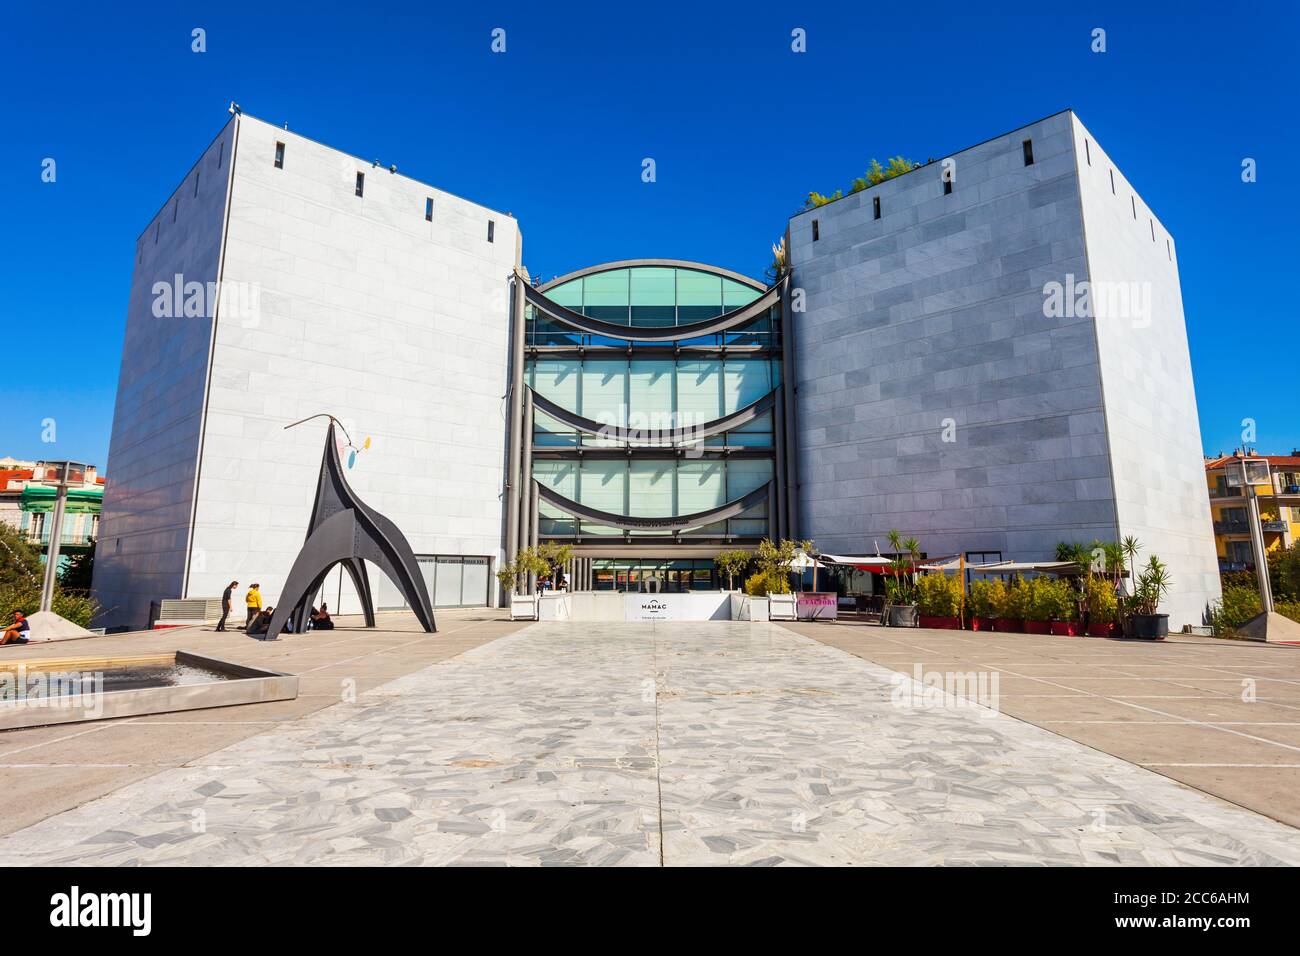 NICE, FRANCE - SEPTEMBER 27, 2018: Museum of Modern and Contemporary Art or MAMAC in Nice city, France Stock Photo